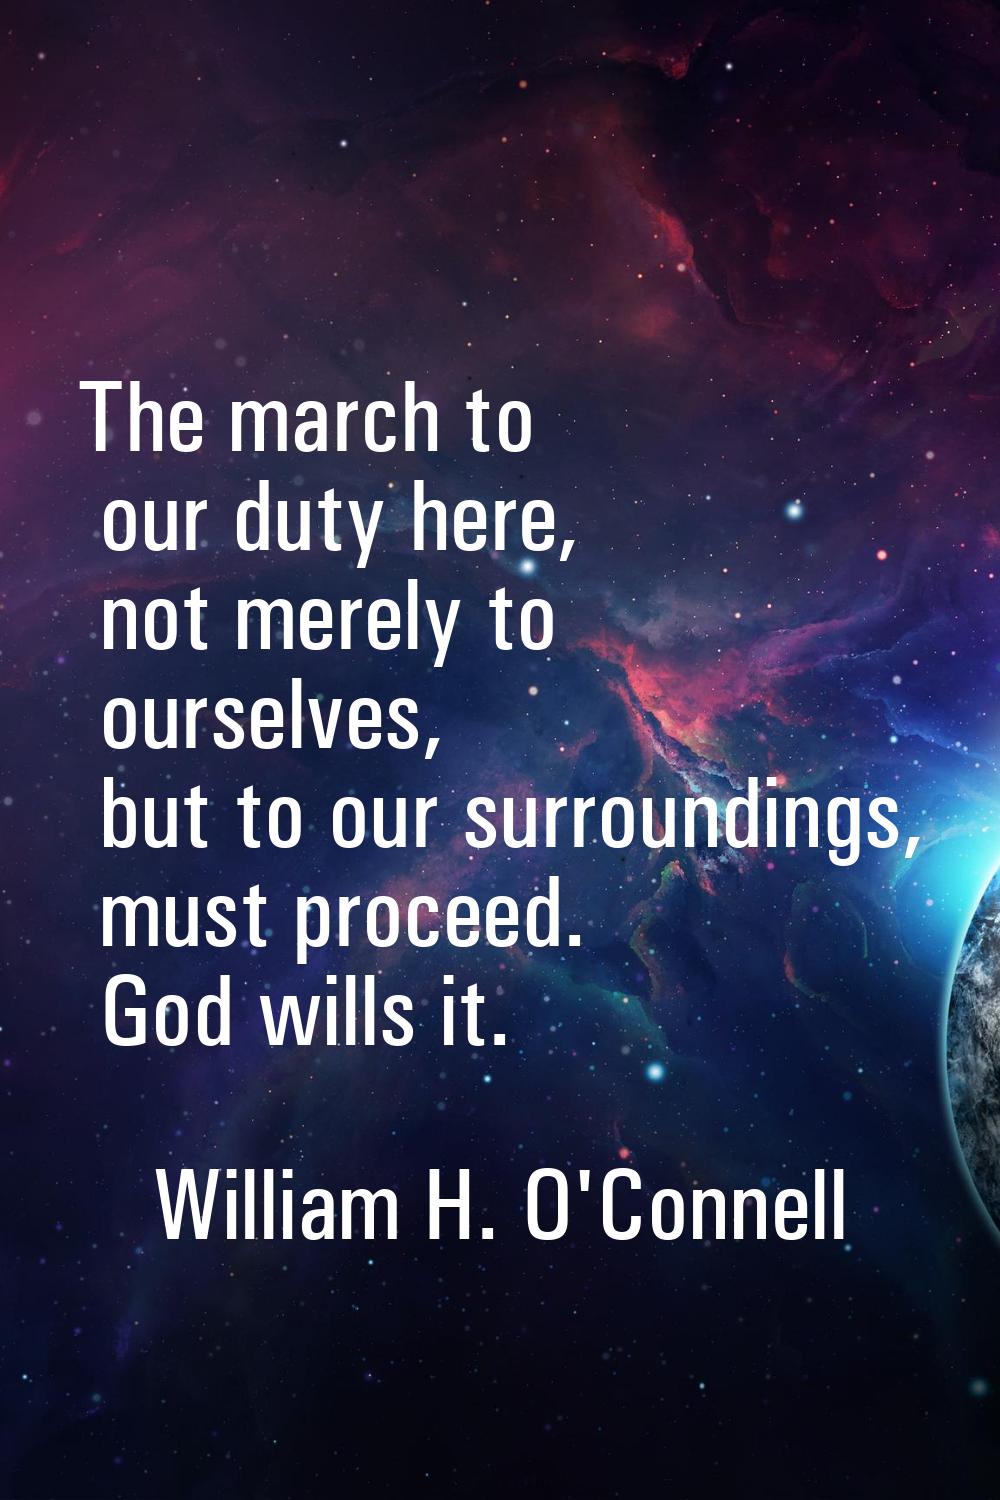 The march to our duty here, not merely to ourselves, but to our surroundings, must proceed. God wil